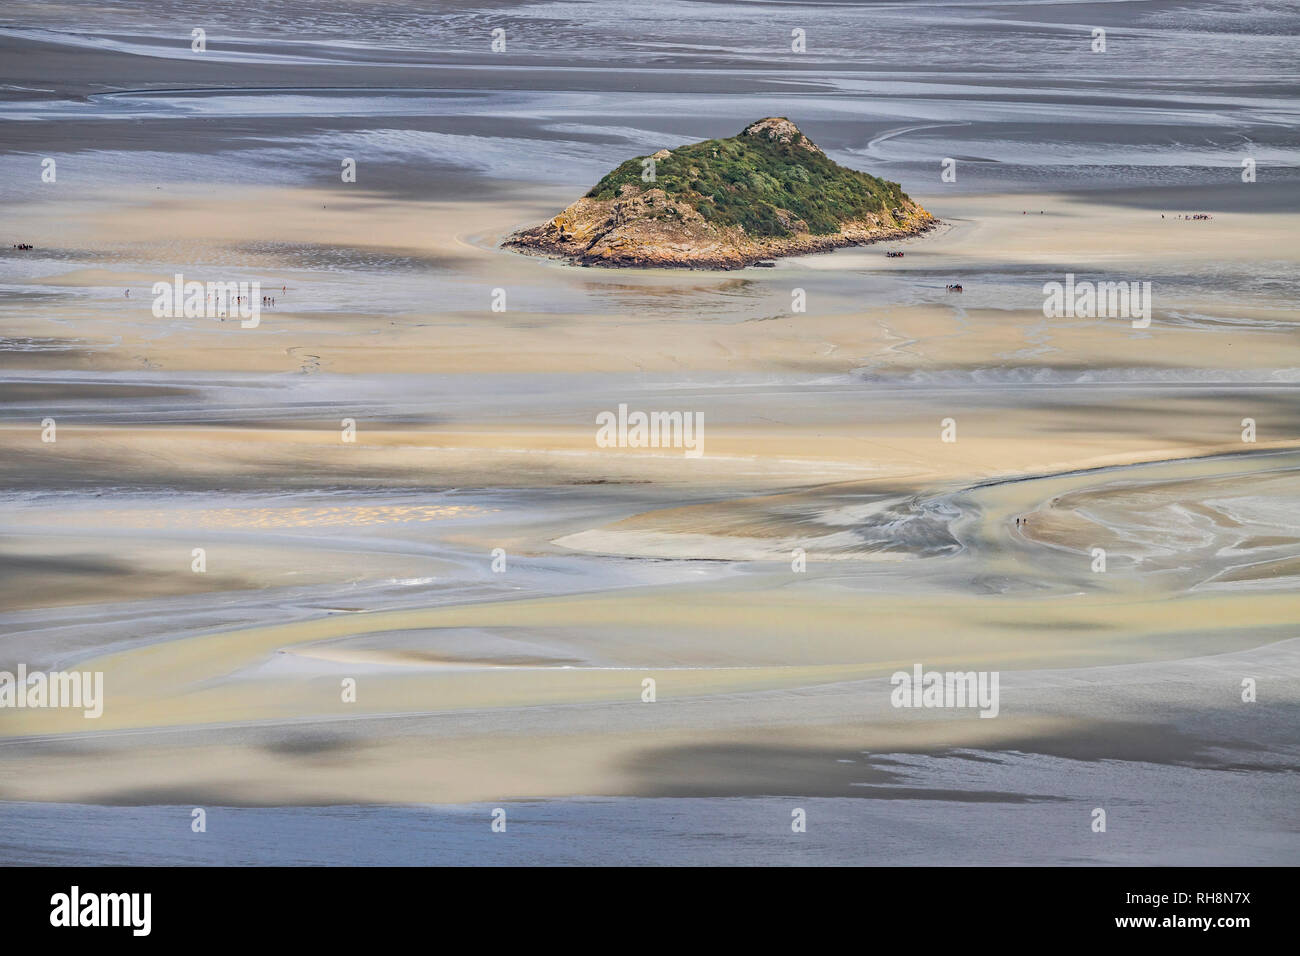 Aerial view of Tombelaine, small tidal island, at low tide, in the bay of Le Mont-Saint-Michel (St Michael's Mount) in Normandy, north-western France  Stock Photo